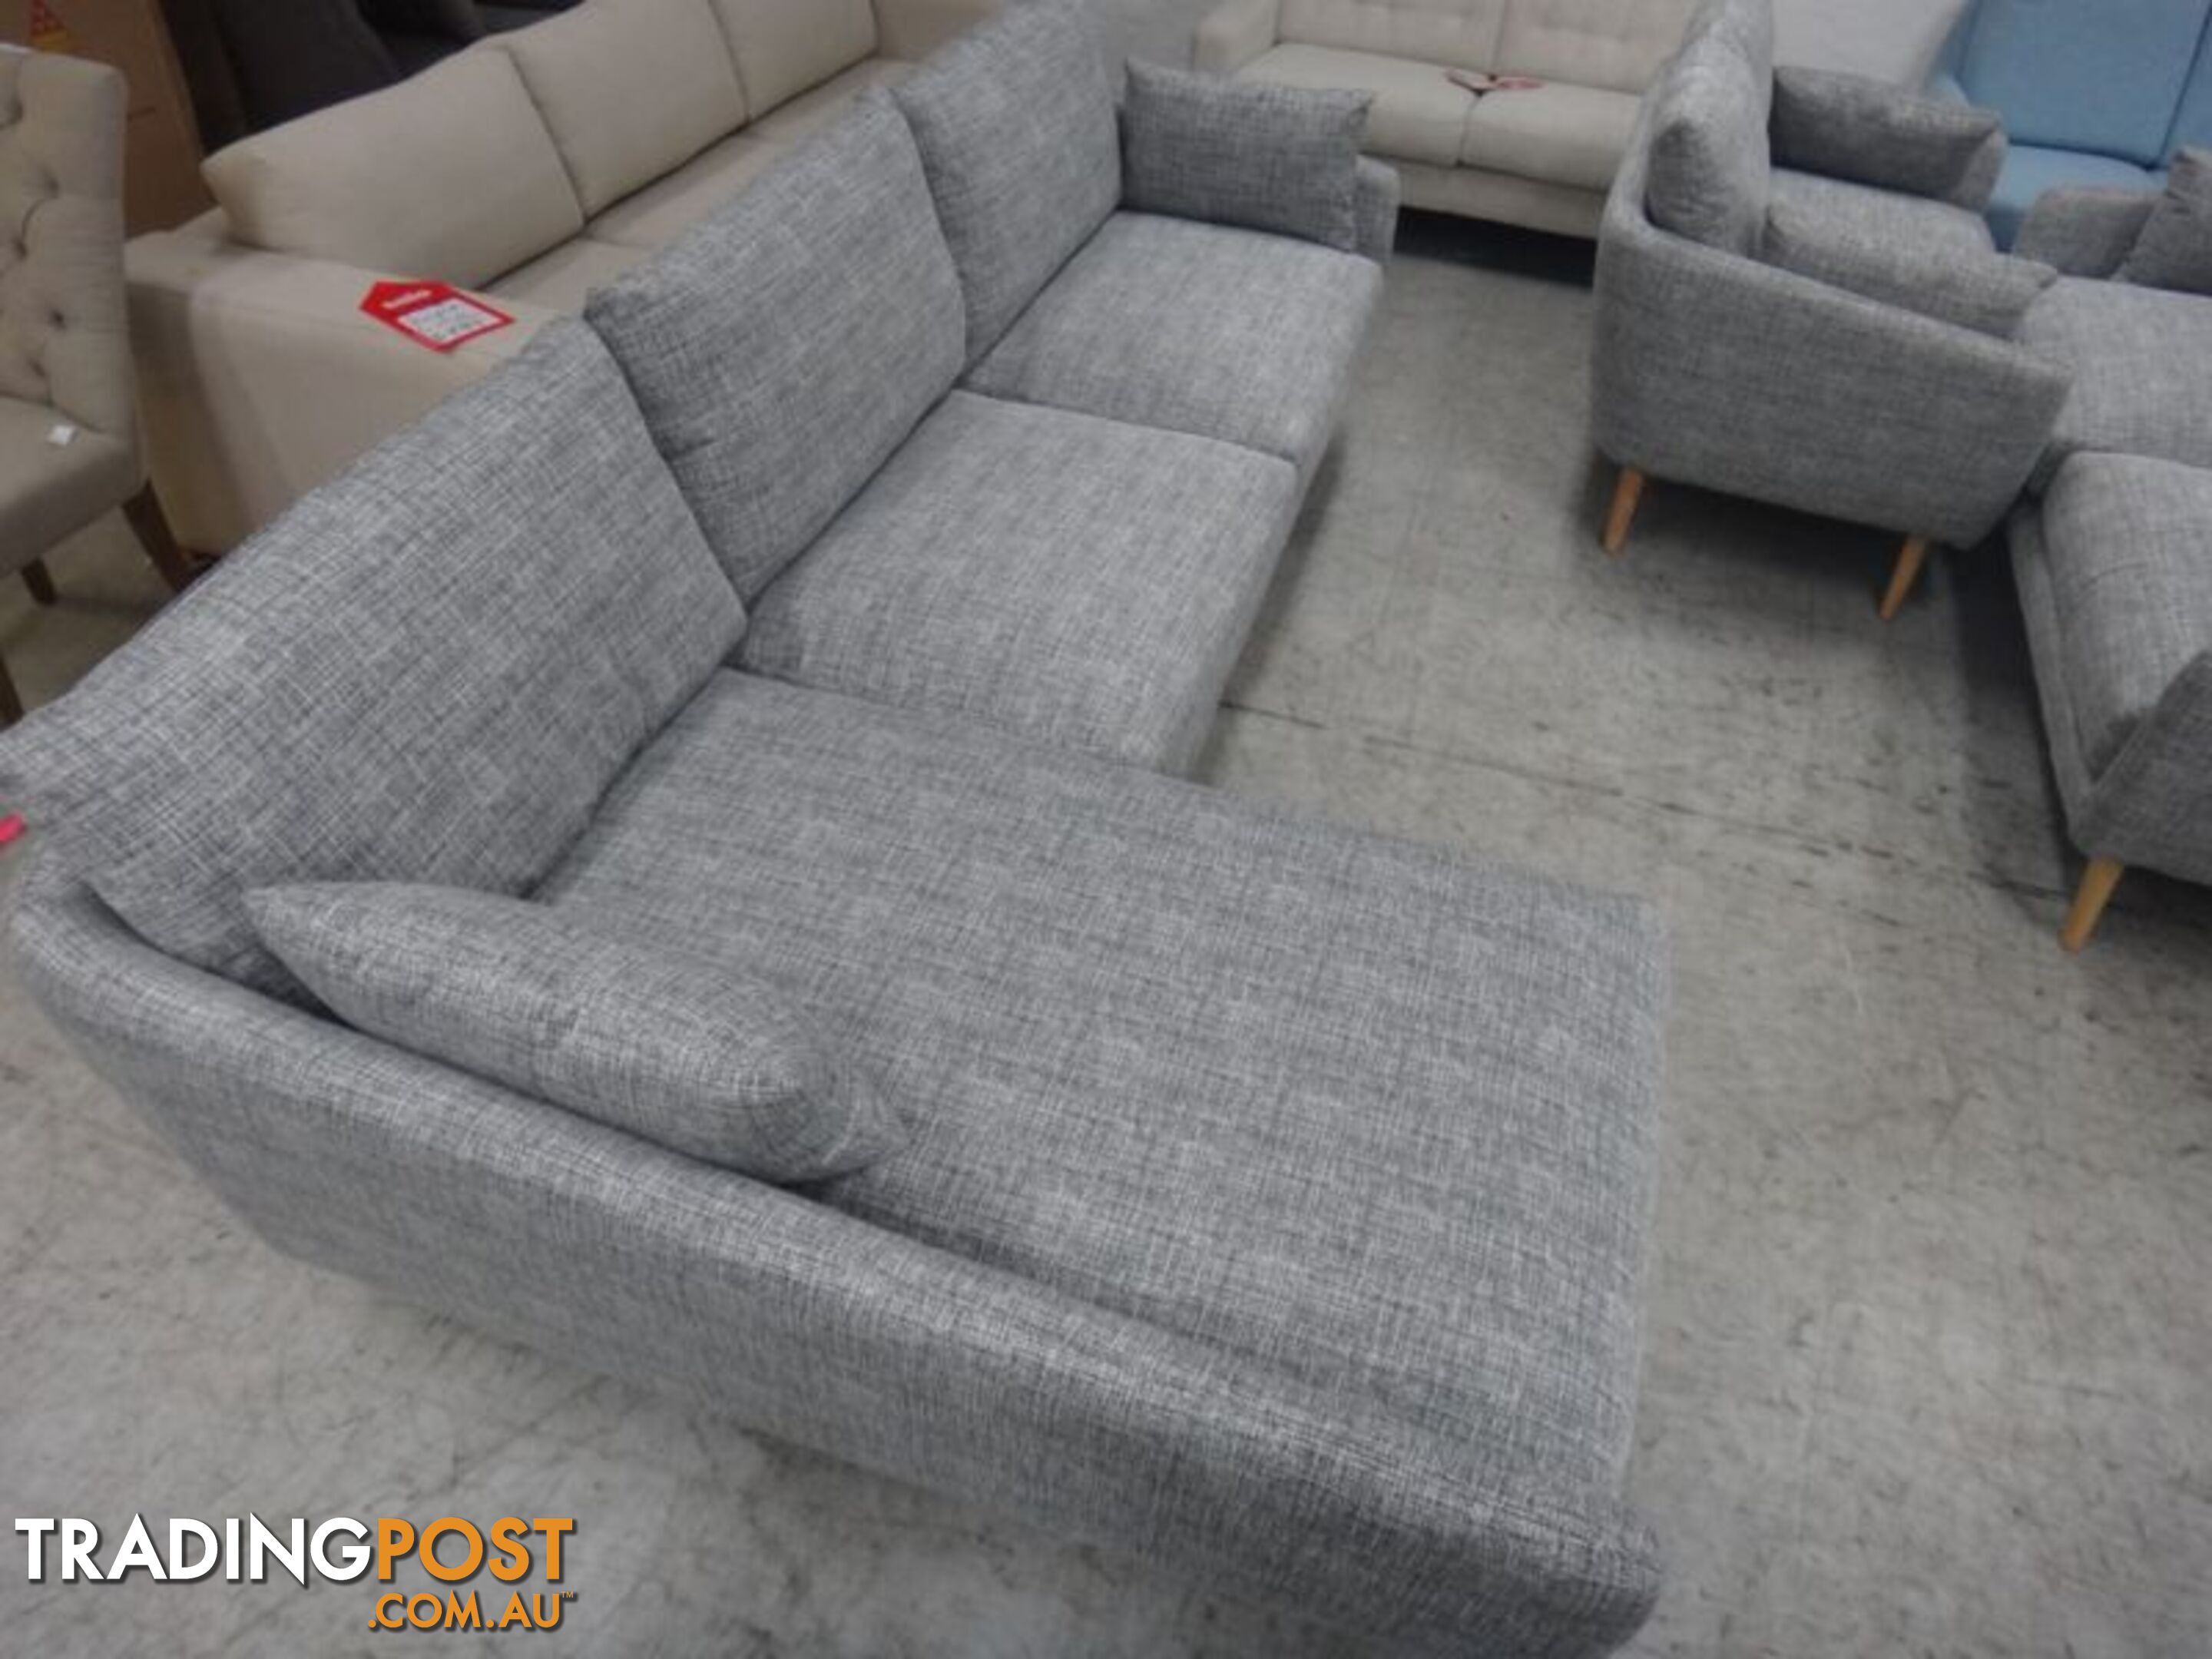 NEW FORWELL CHAISE LOUNGES - RHF & LHF AVAILABLE